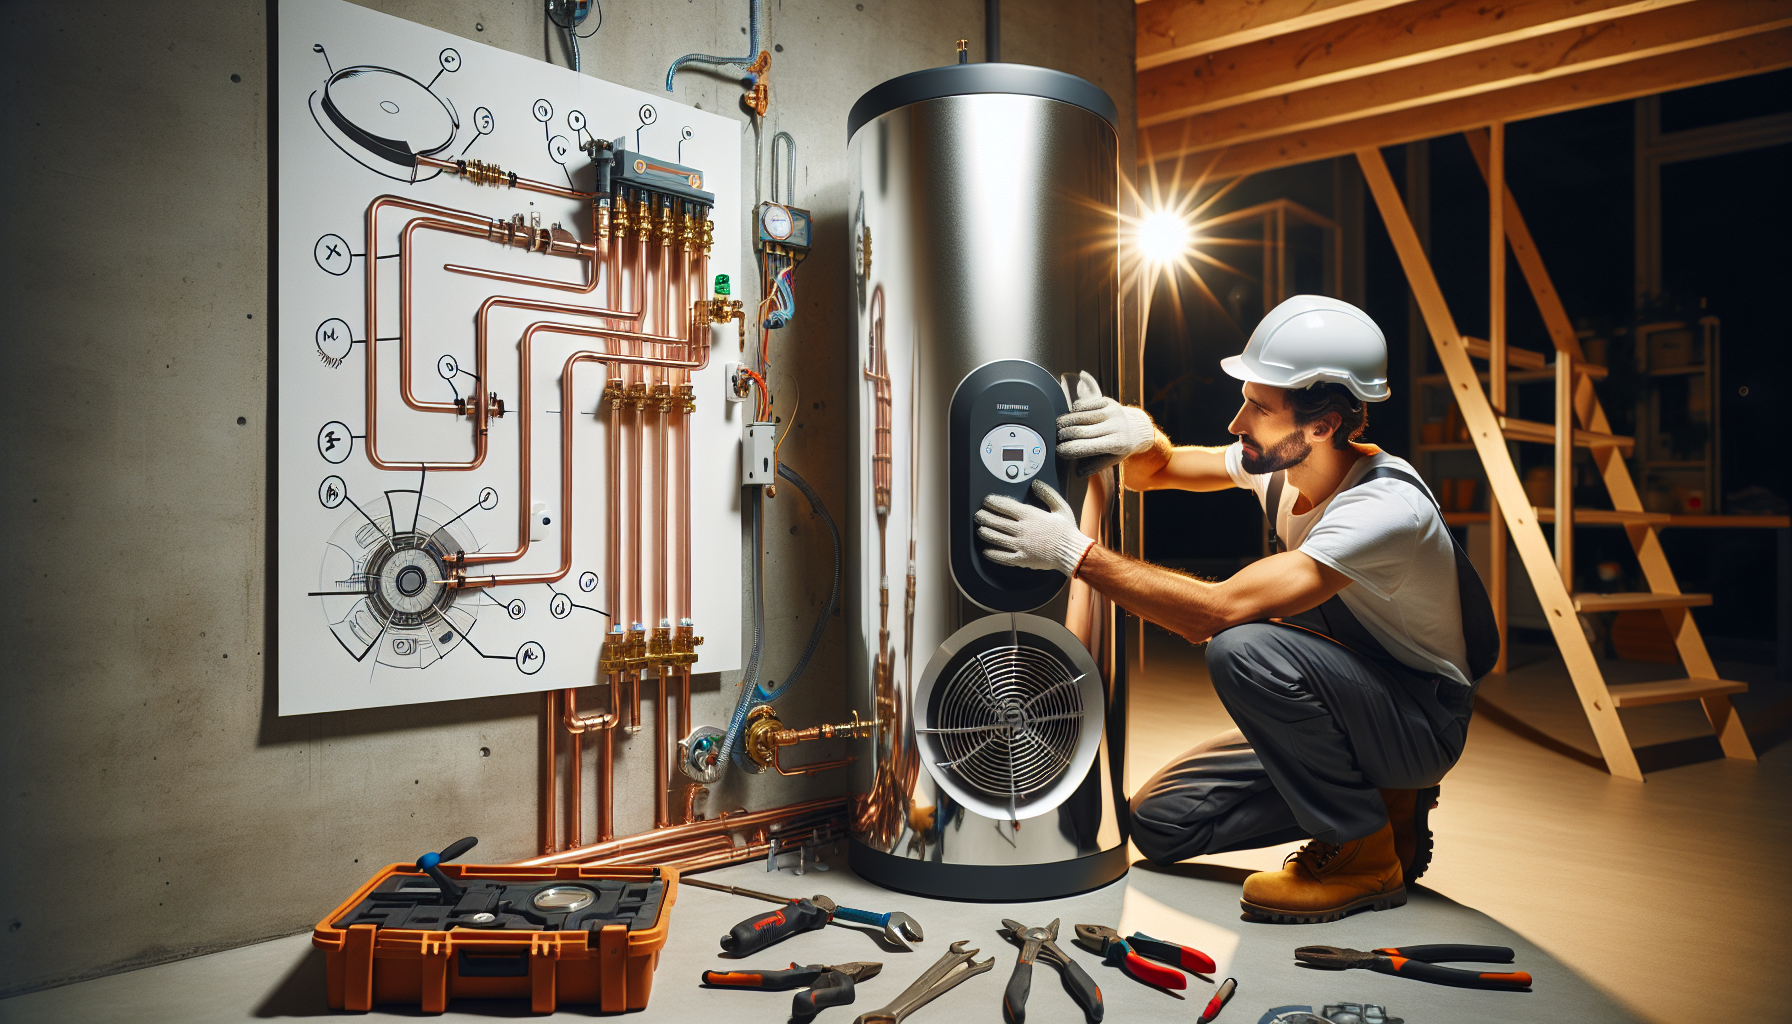 Illustration of electric hot water system installation process